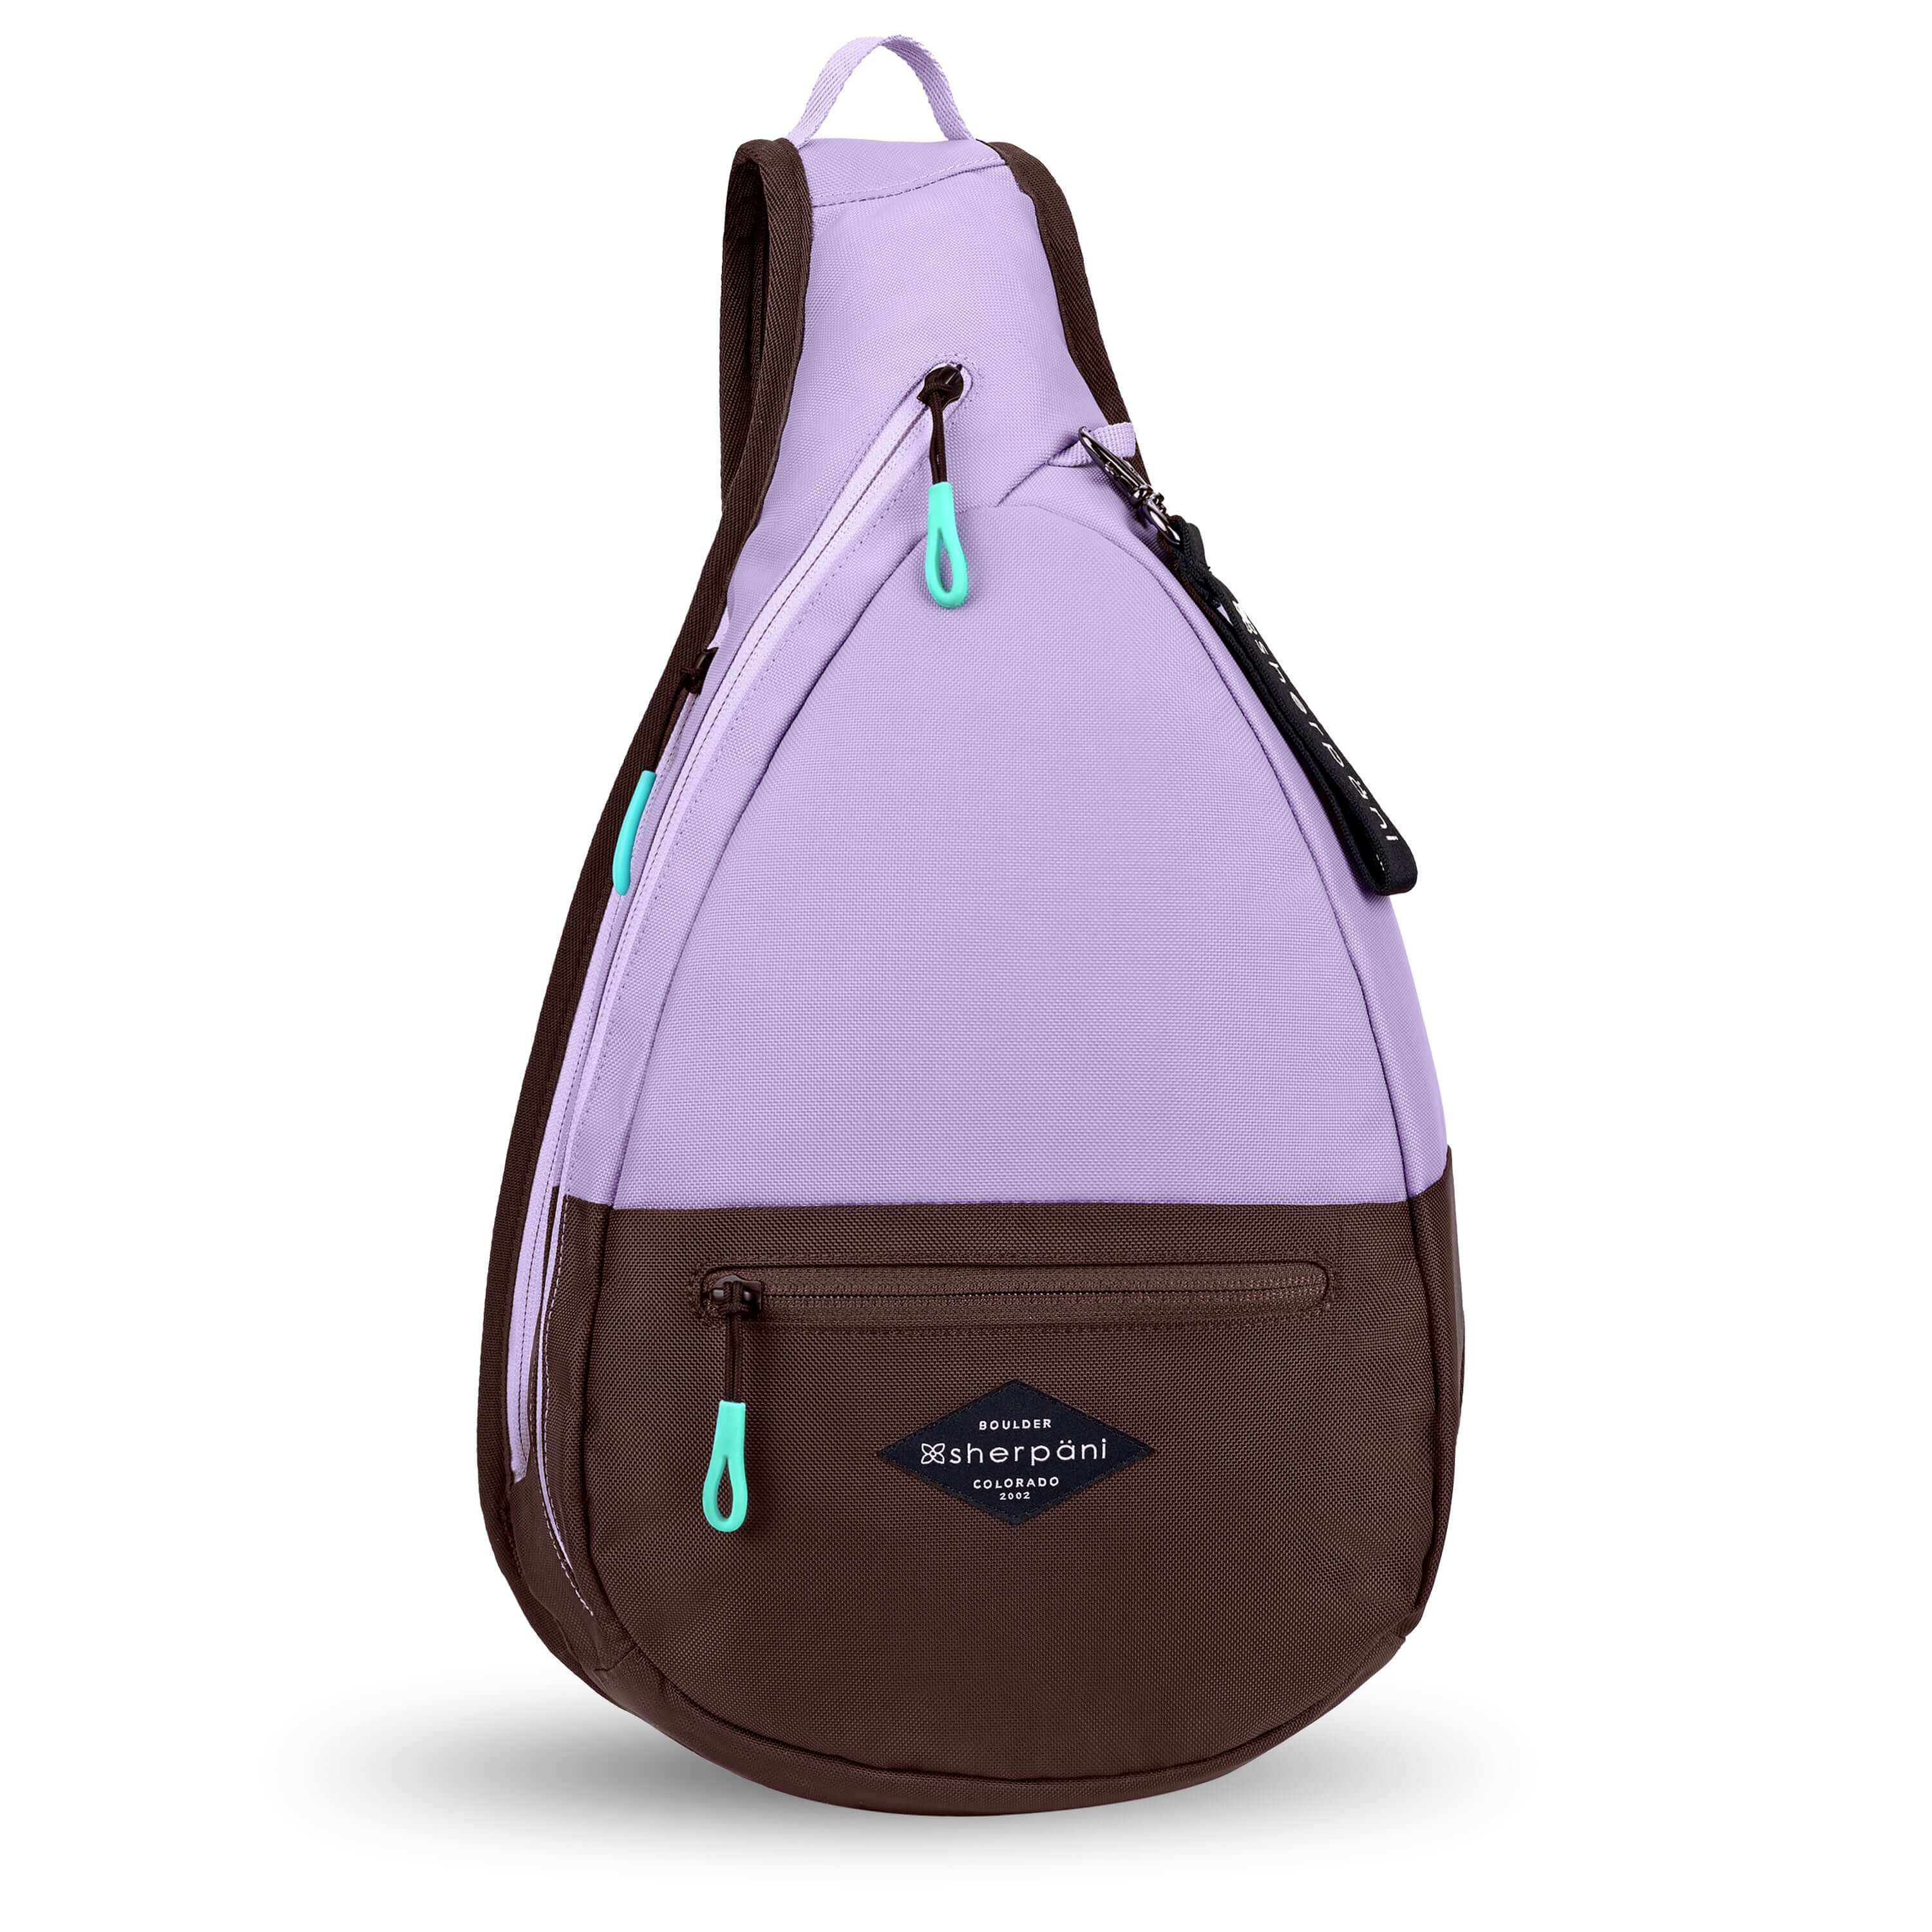 Flat front view of Sherpani's bag, the Esprit in Lavender. The teardrop shaped bag is two-toned in lavender and brown. There is a small zipper pocket on the front of the bag, the main zipper compartment in the middle, and another zipper pocket towards the back of the bag. It has easy-pull zippers accented in aqua. A branded Sherpani keychain is clipped to a fabric loop near the top of the bag. 